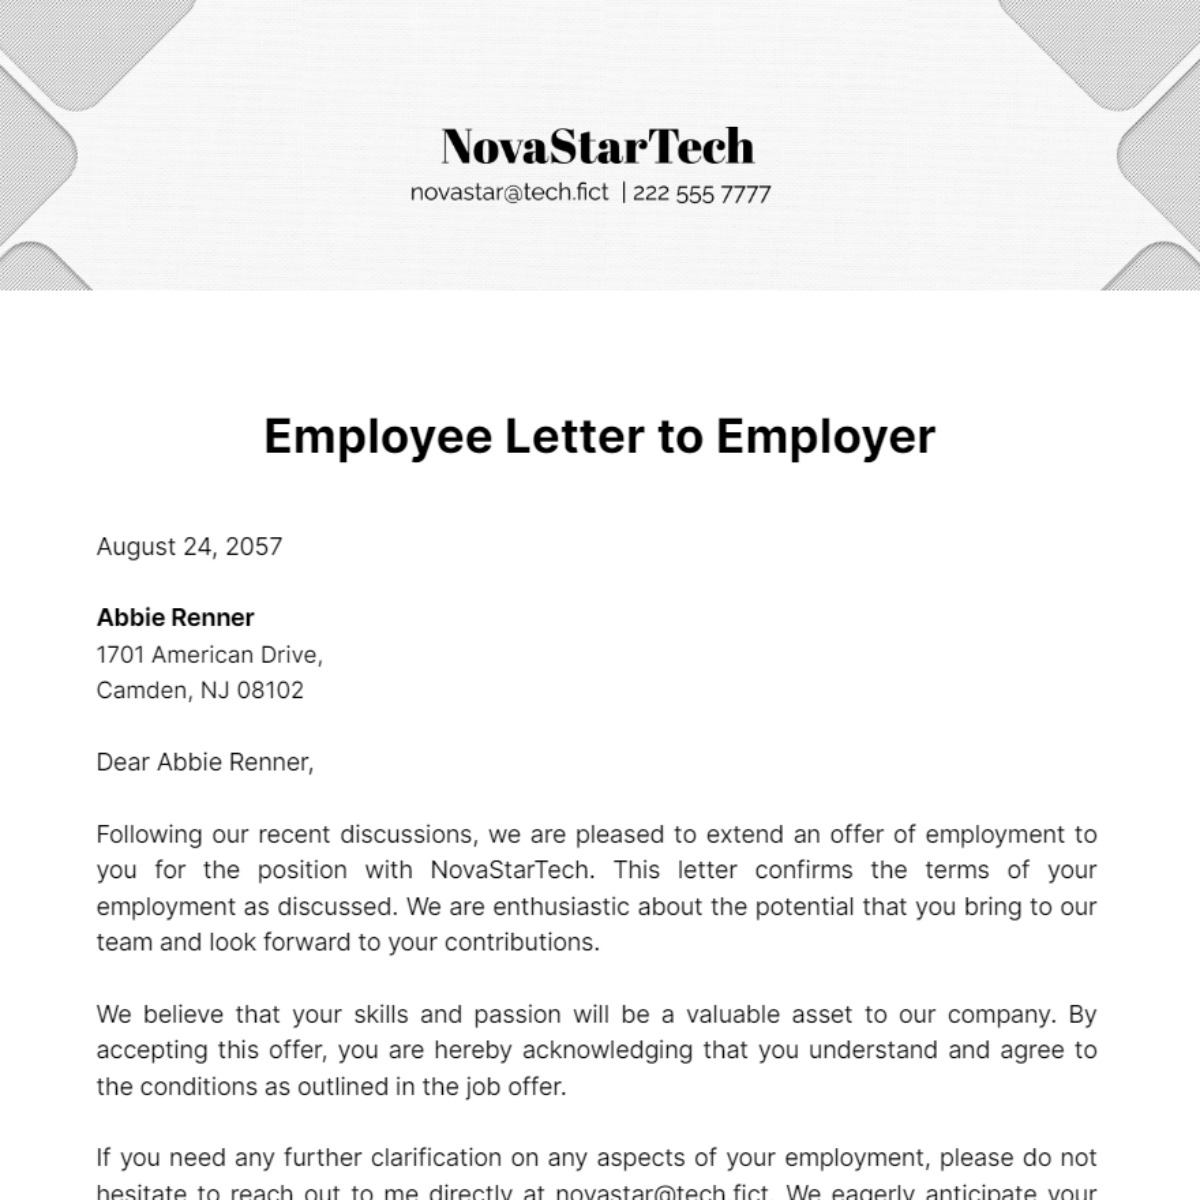 Employee Letter to Employer Template